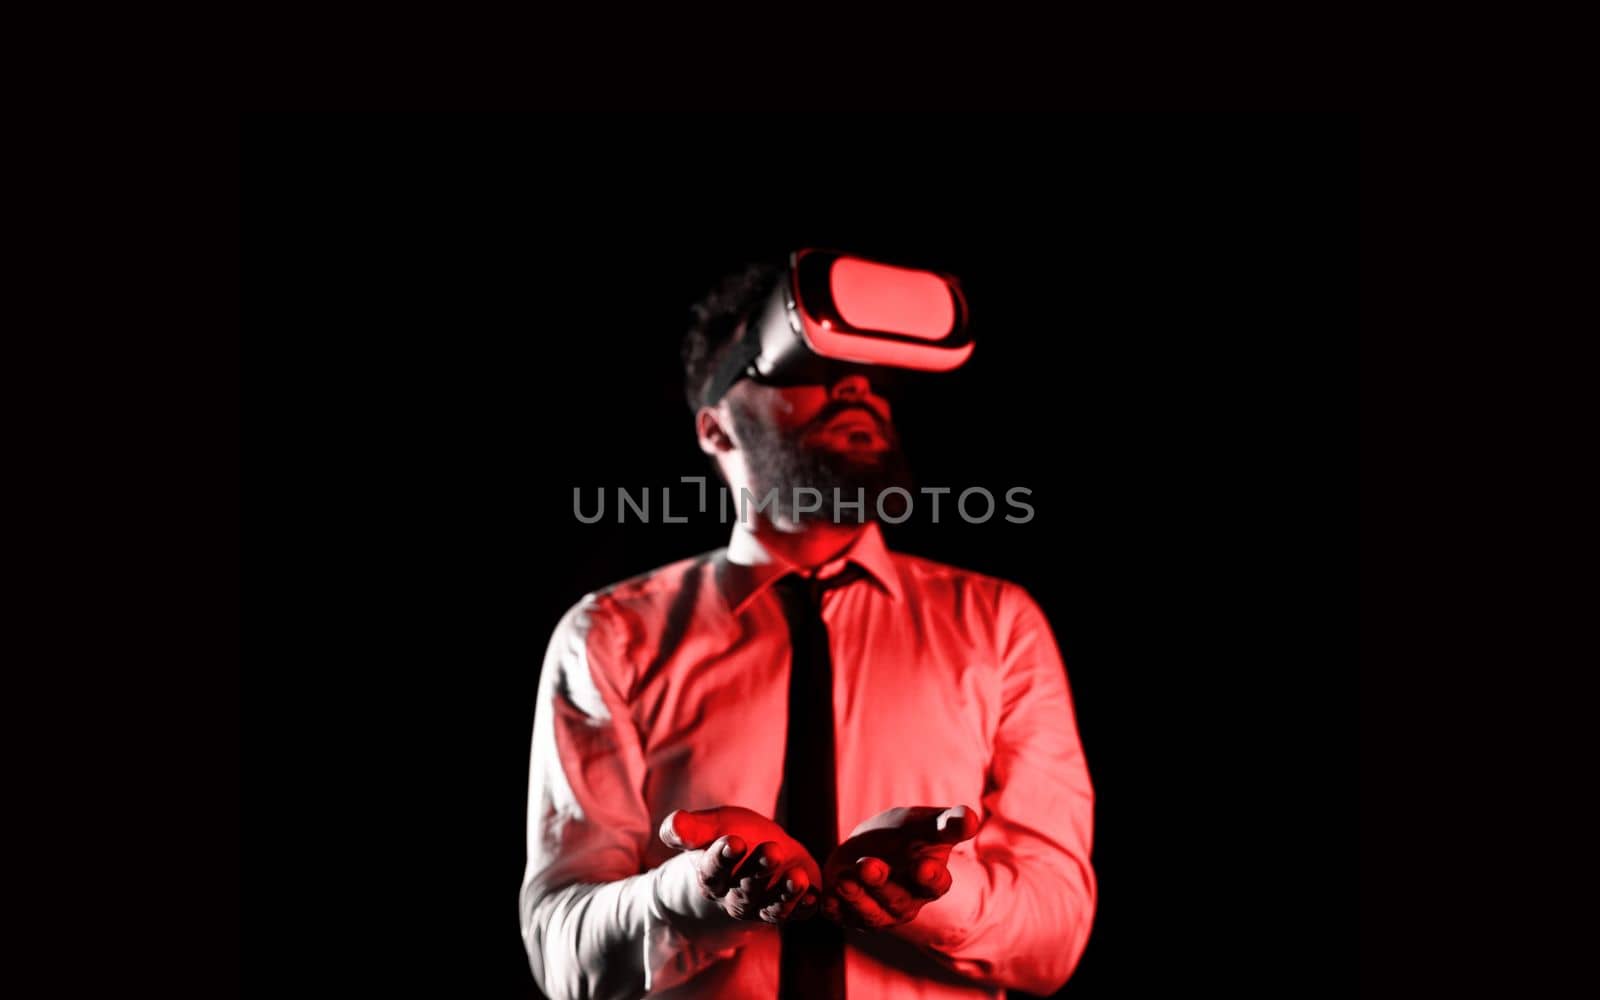 Man Wearing Vr Glasses And Holding Important Messages In Hands.